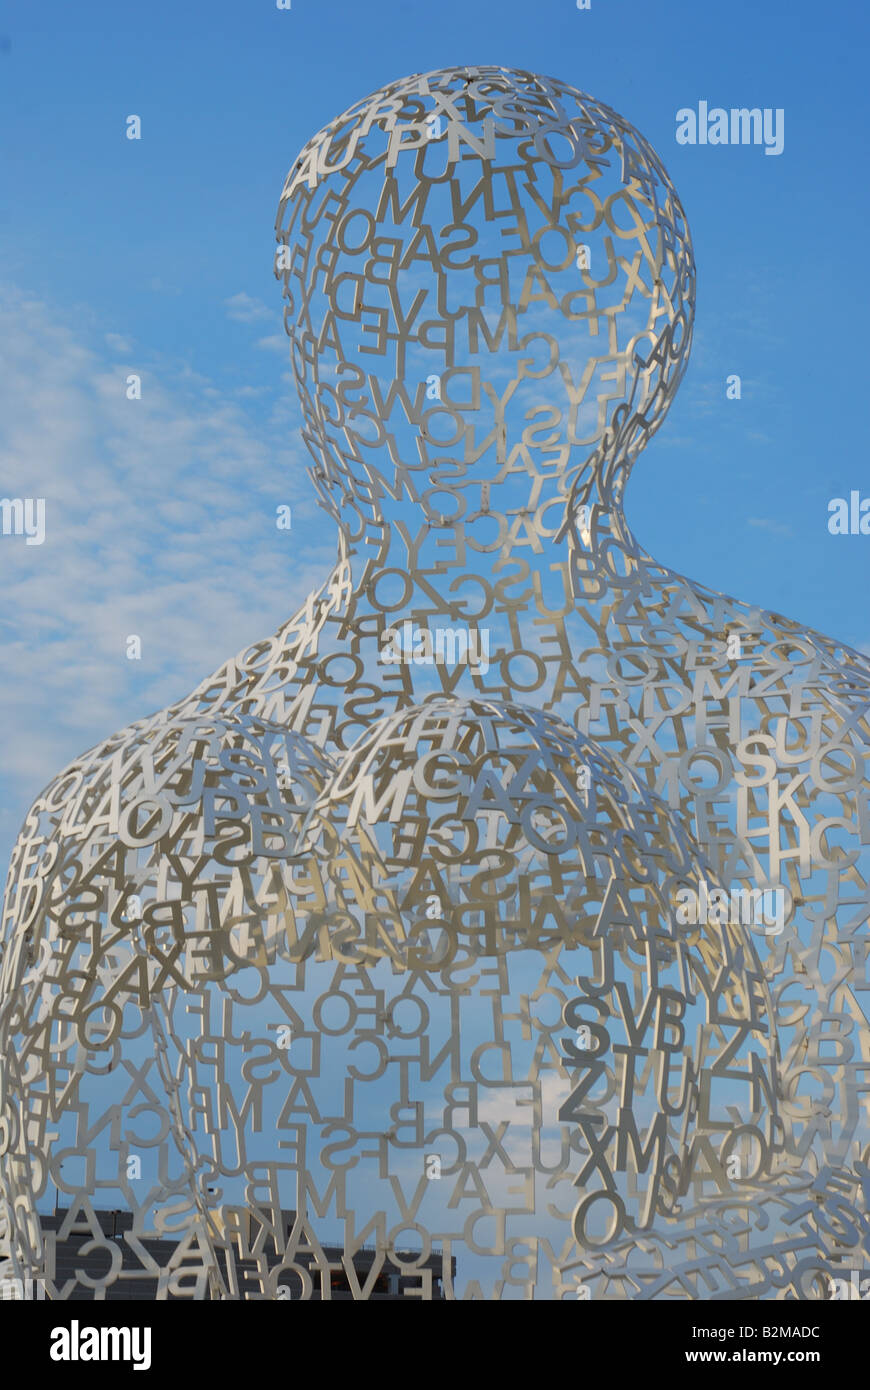 Detail of Nomade Sculpture by Jaume Plensa located in downtown Des Moines Iowa  Gateway Park next to the Pappajohn Center. Stock Photo